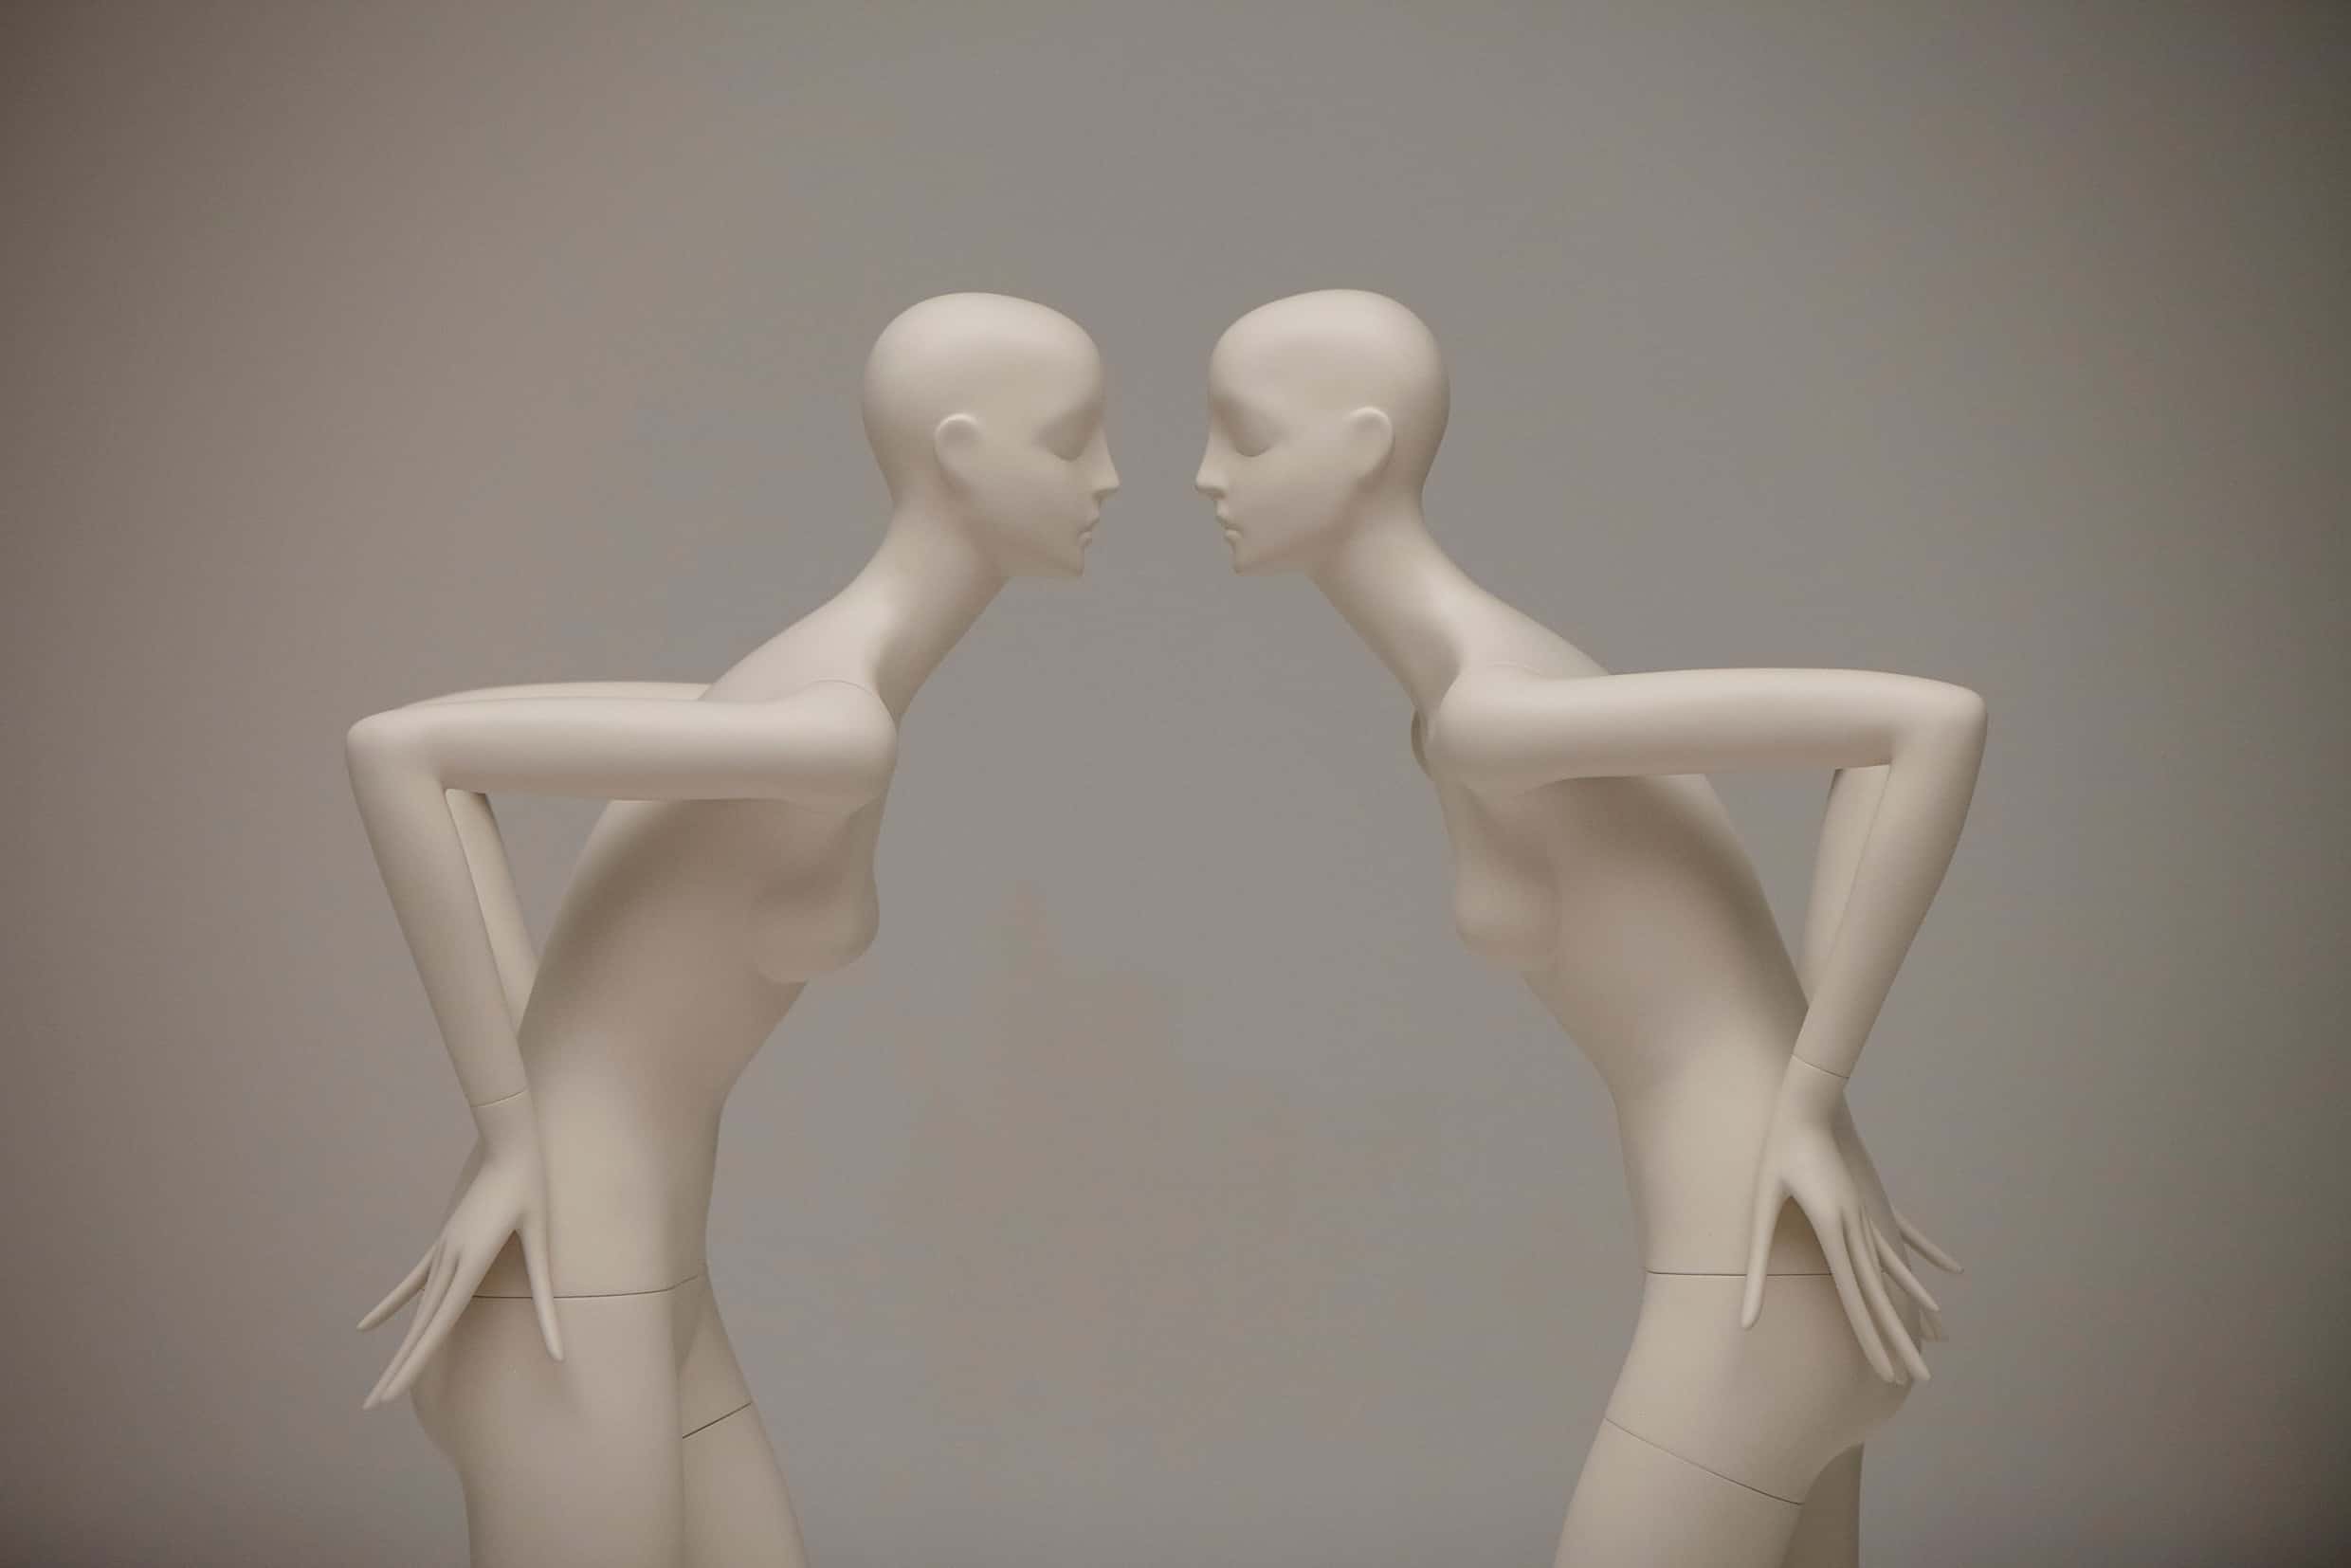 Two Aloof mannequins face eachother